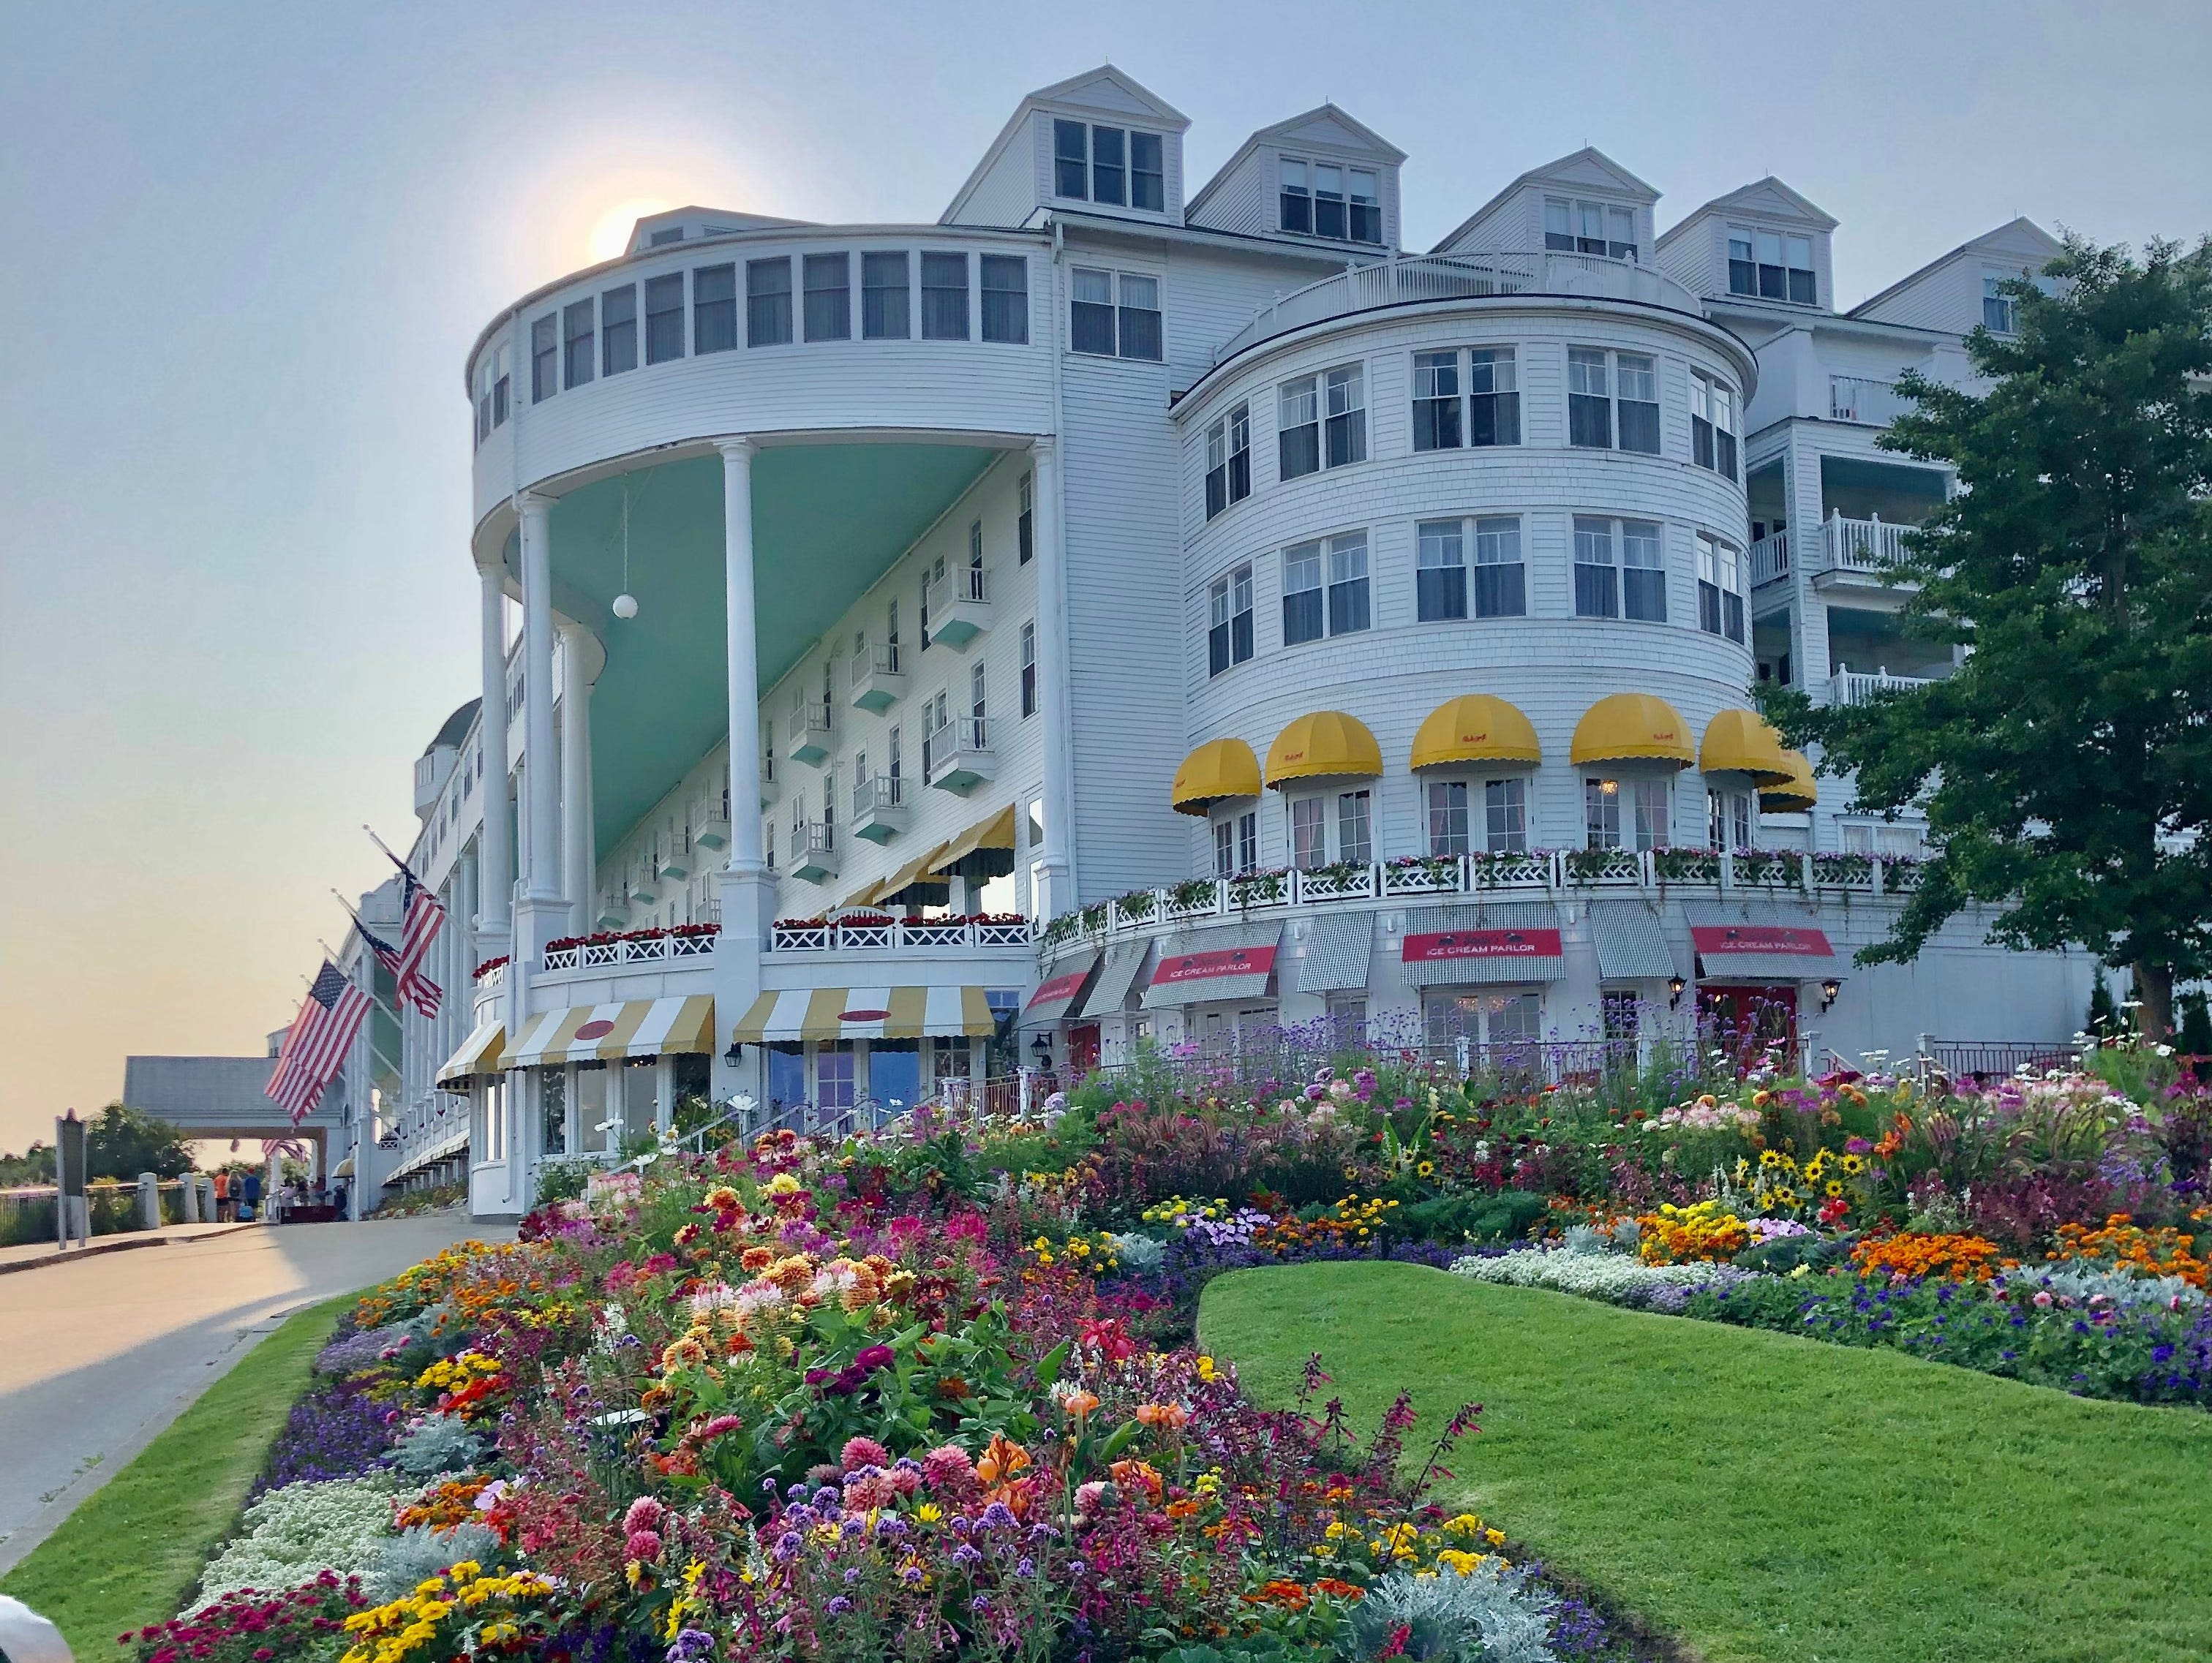 I visited Mackinac Island, voted the No. 1 travel destination this summer. No cars are allowed on the dreamy Midwest island.